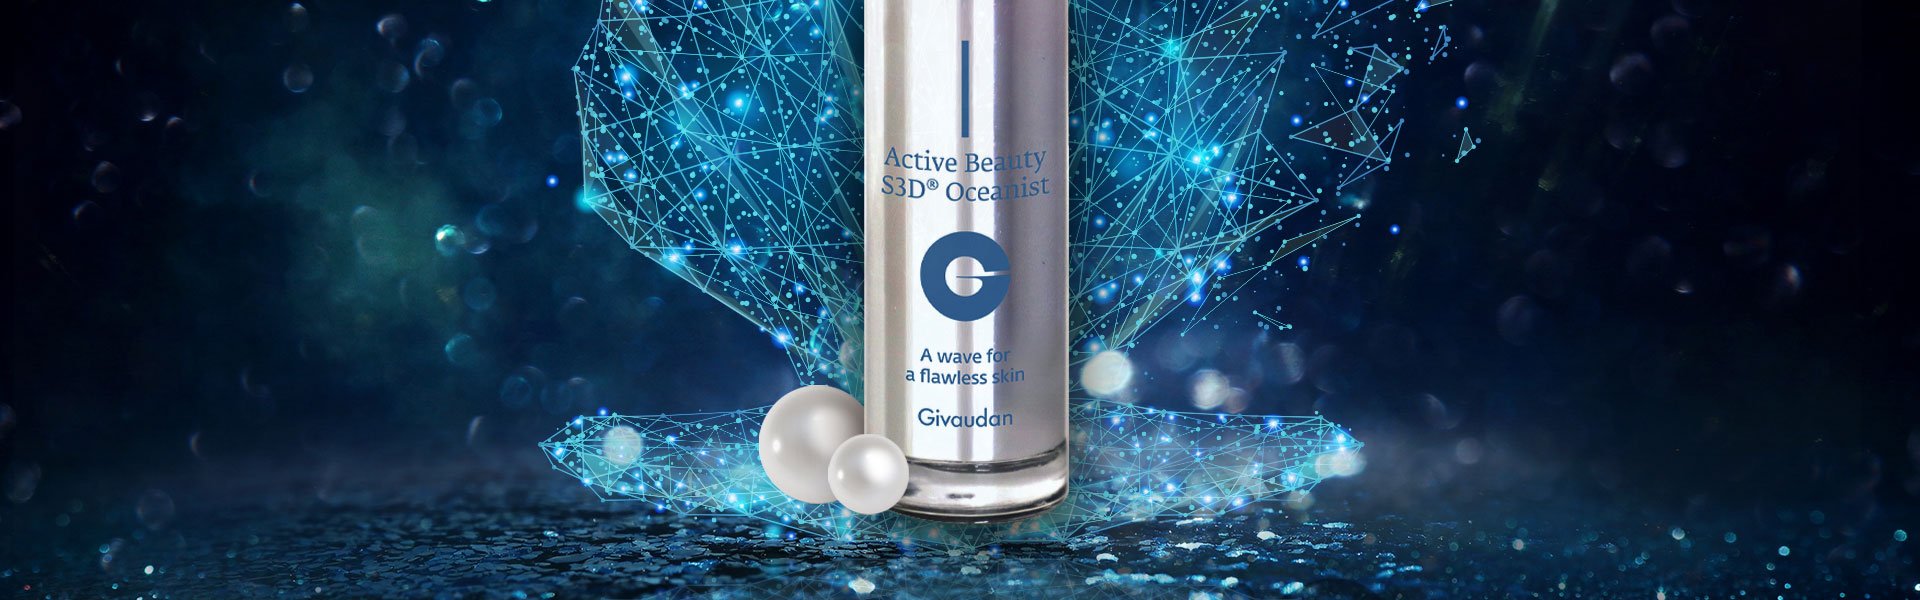 S3D® Oceanist: A wave for a flawless skin